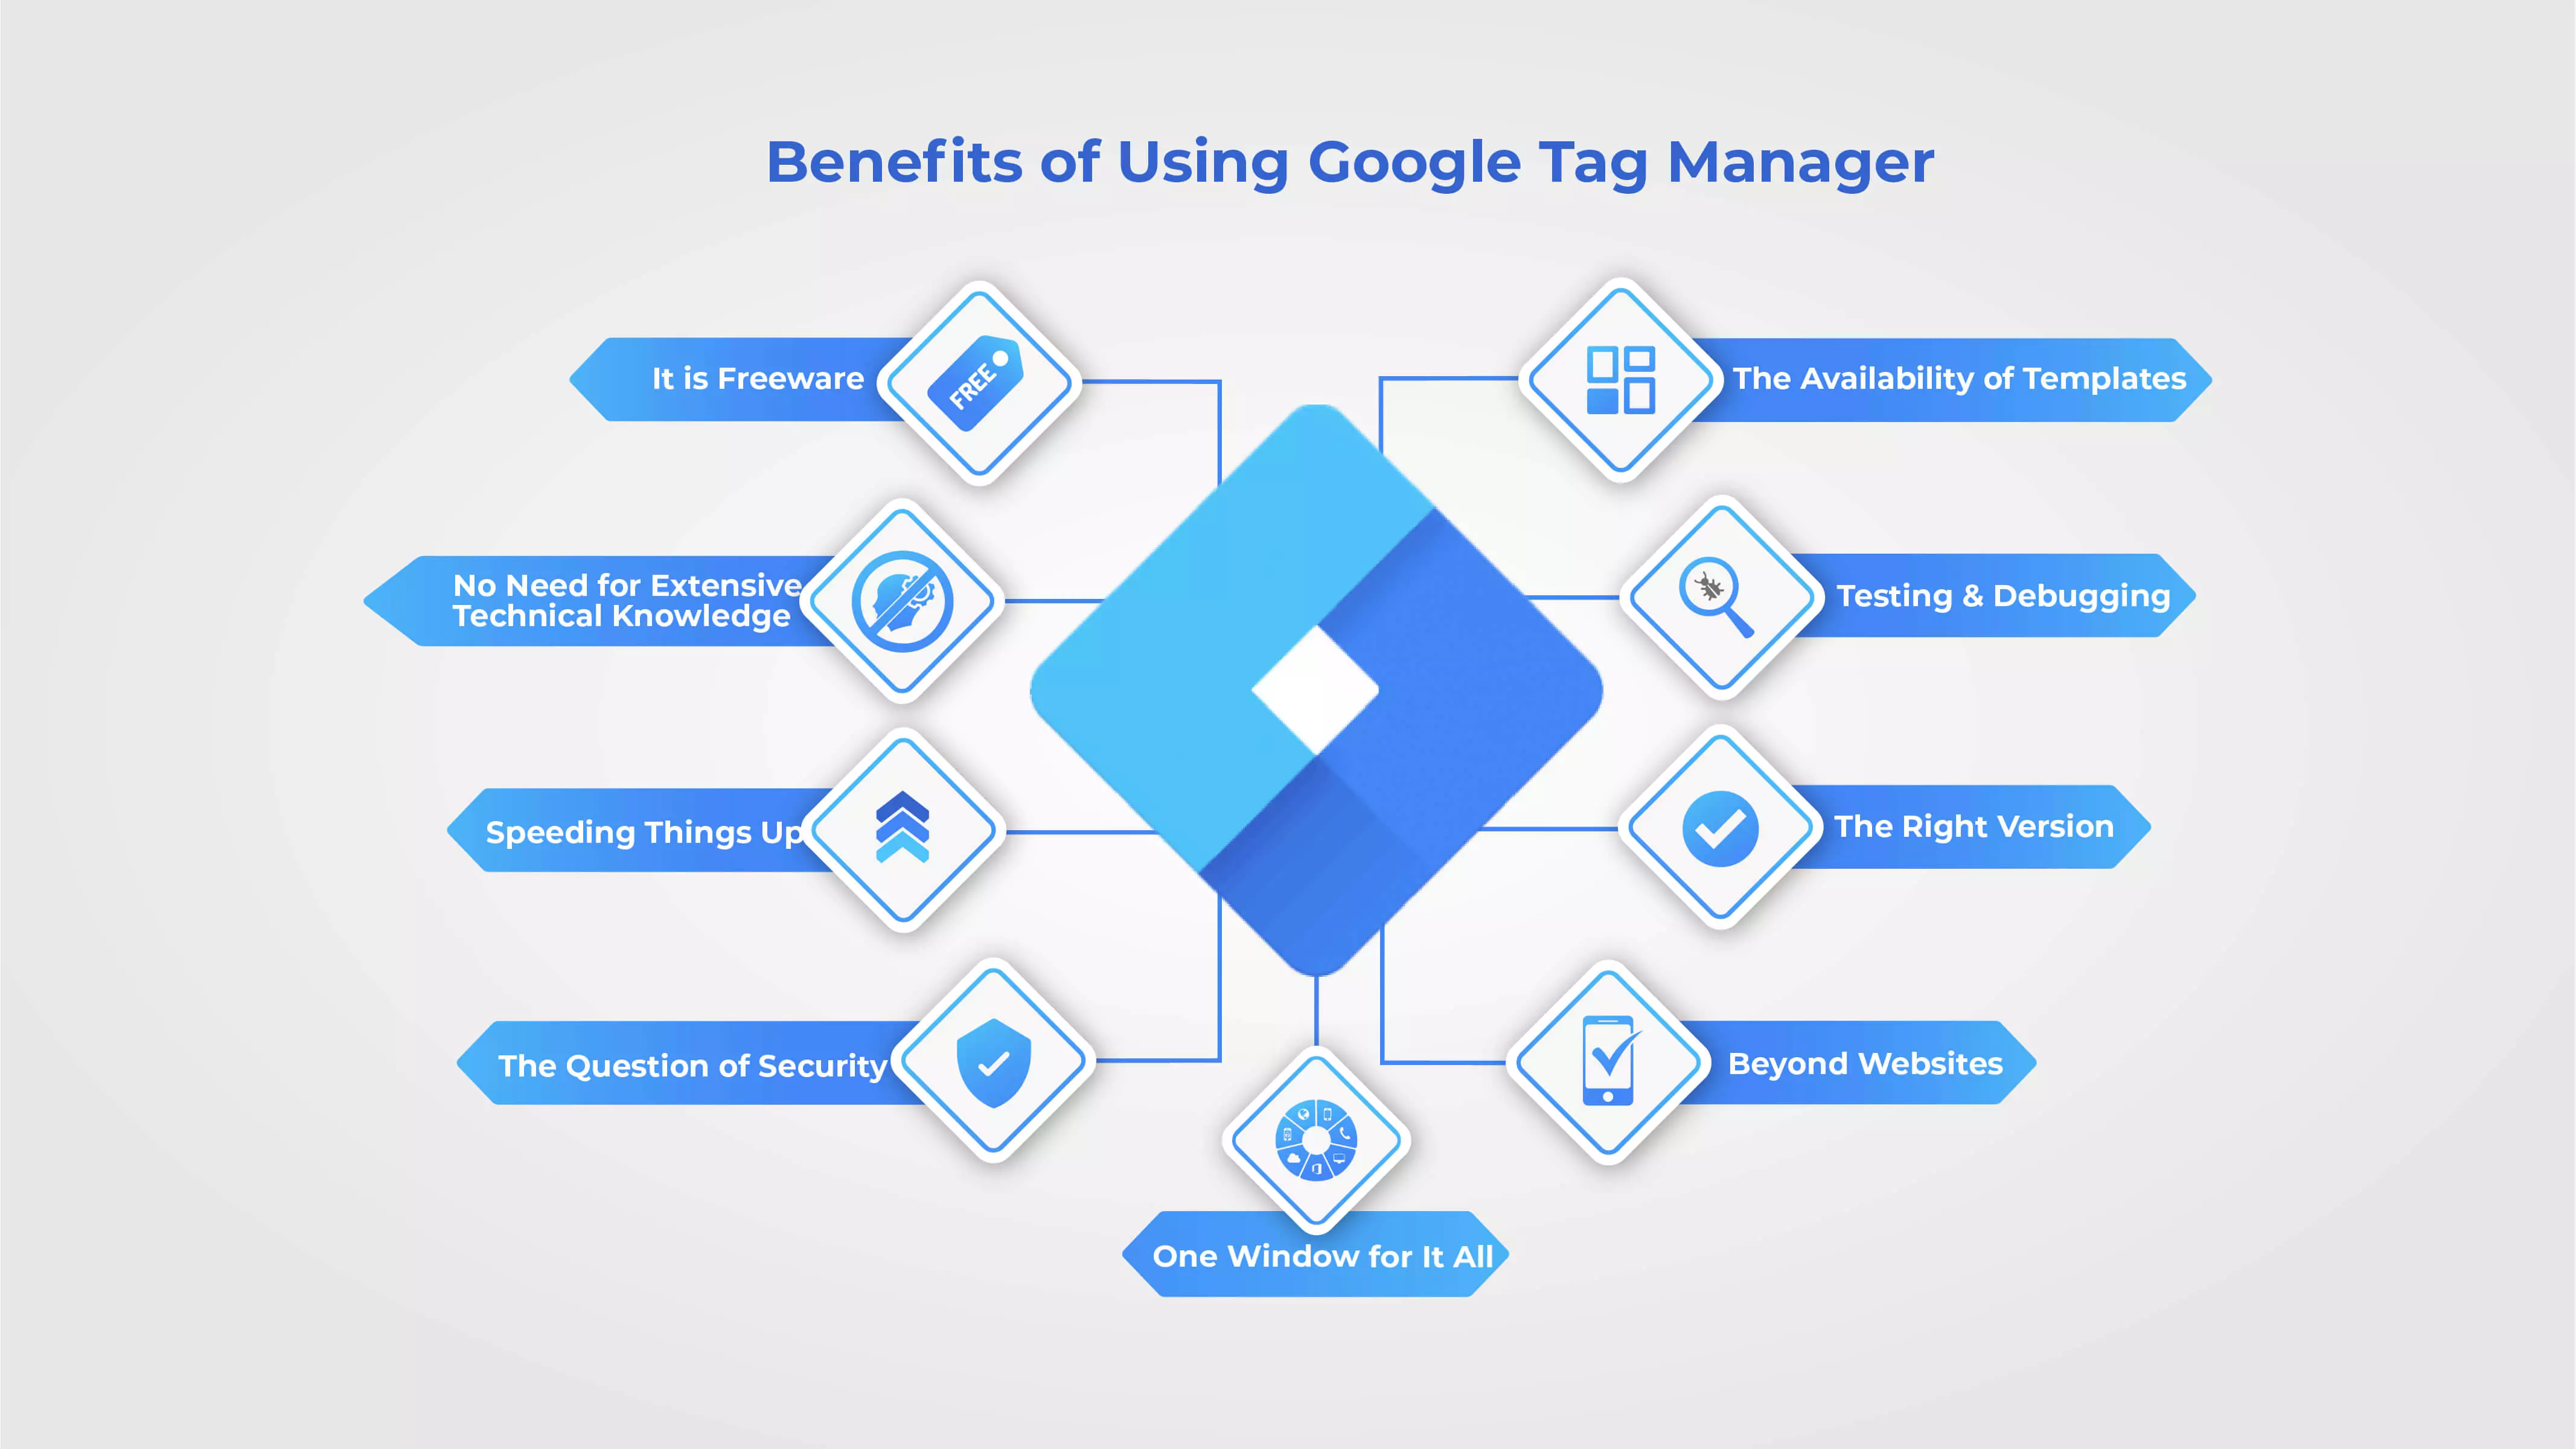 Benefits of Using Google Tag Manager?